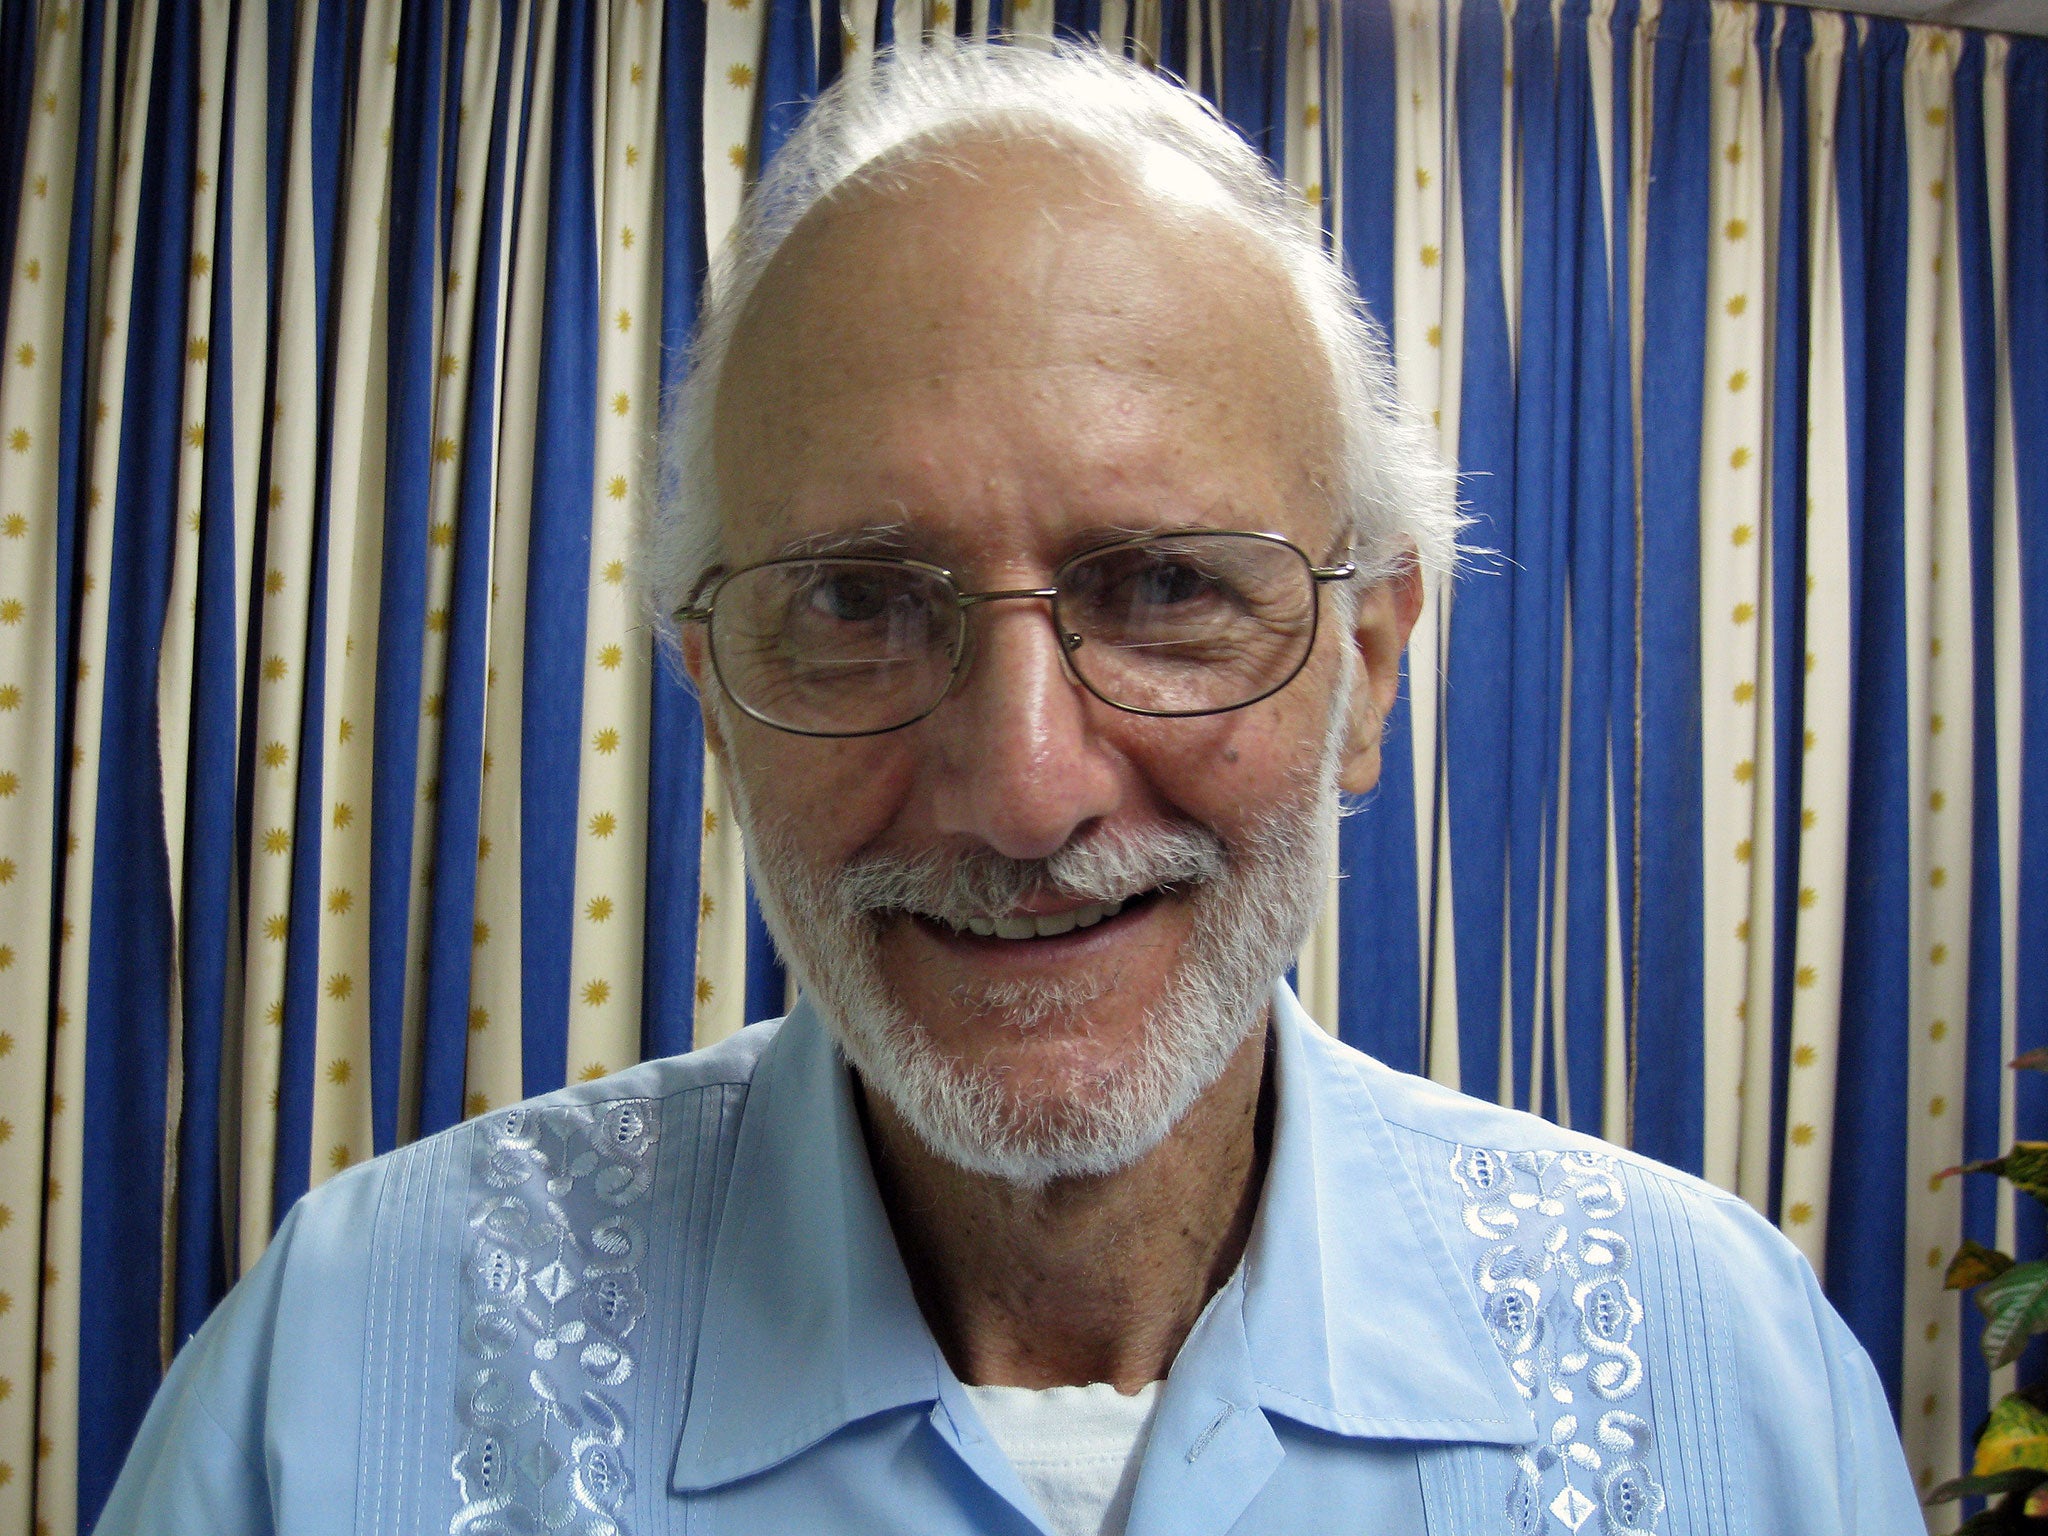 Alan Gross poses for a photo during a visit by Rabbi Elie Abadie and U.S. lawyer James L. Berenthal at Finlay military hospital as he serves a prison sentence in Havana, Cuba